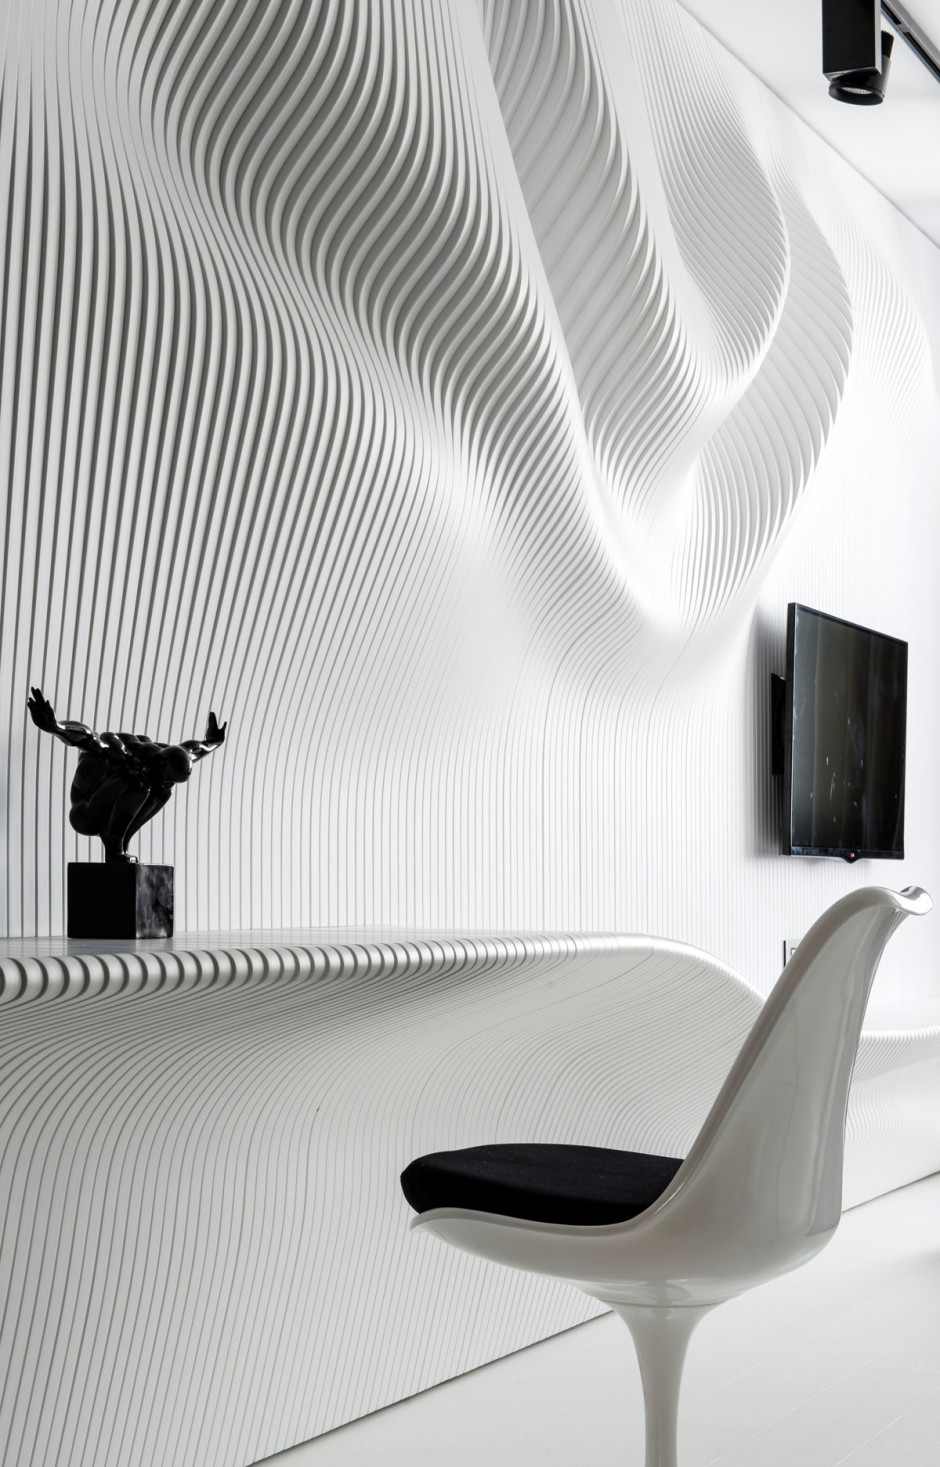 Bedroom Design With Enchanting Bedroom Design Futuristic Bedroom With White Colored Wooden Curvy Wall And Black Pendant Lamps Architecture 10 Stunning Black And White Bedroom Ideas In Fall Color Accent